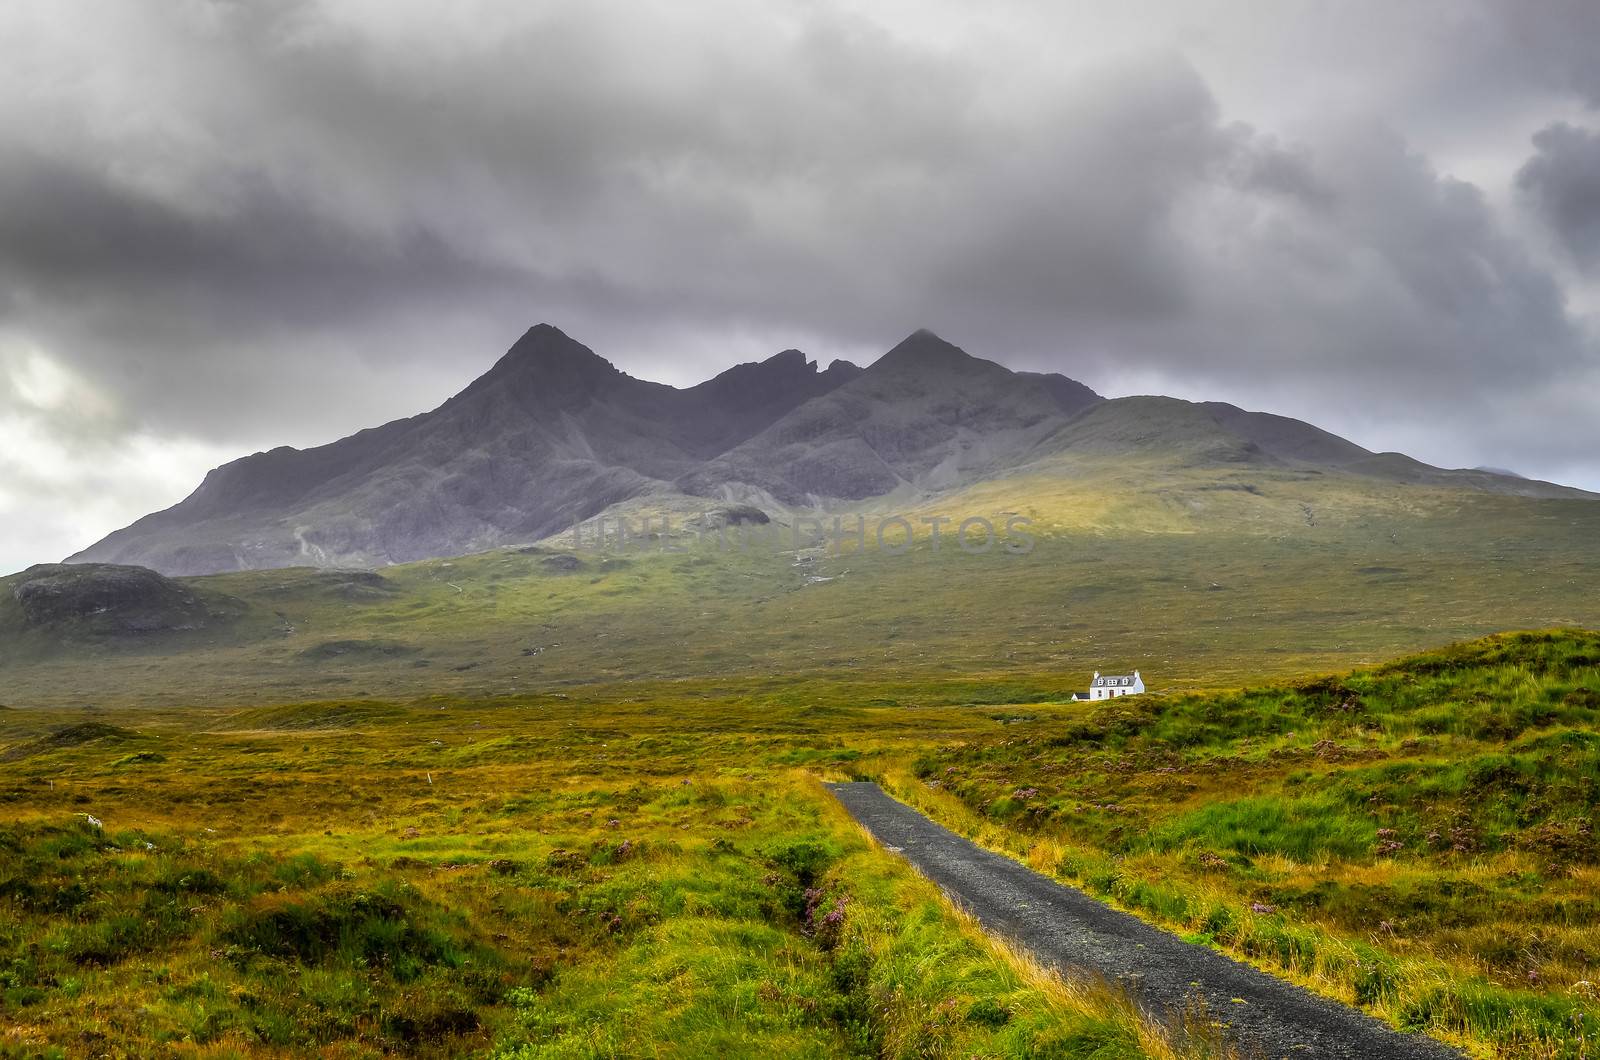 Cuillin Hills mountains with lonely house and road, Scotland by martinm303